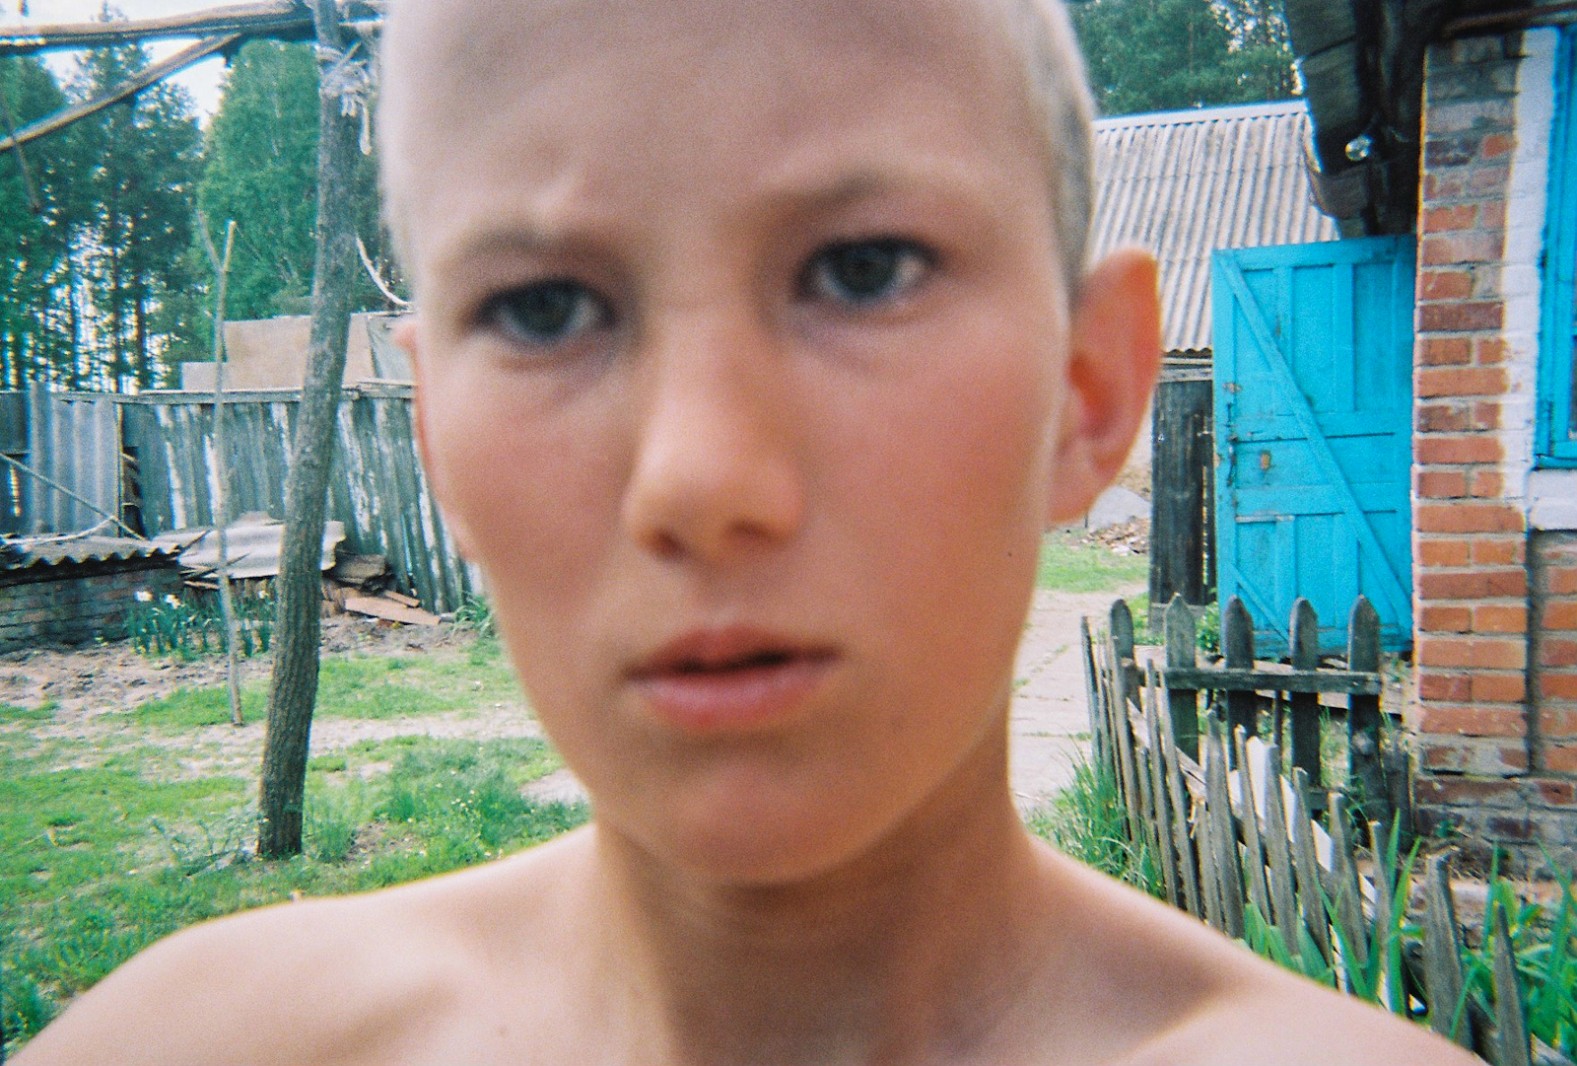 A young boy takes a 'selfie' in outside his house near Chernobyl